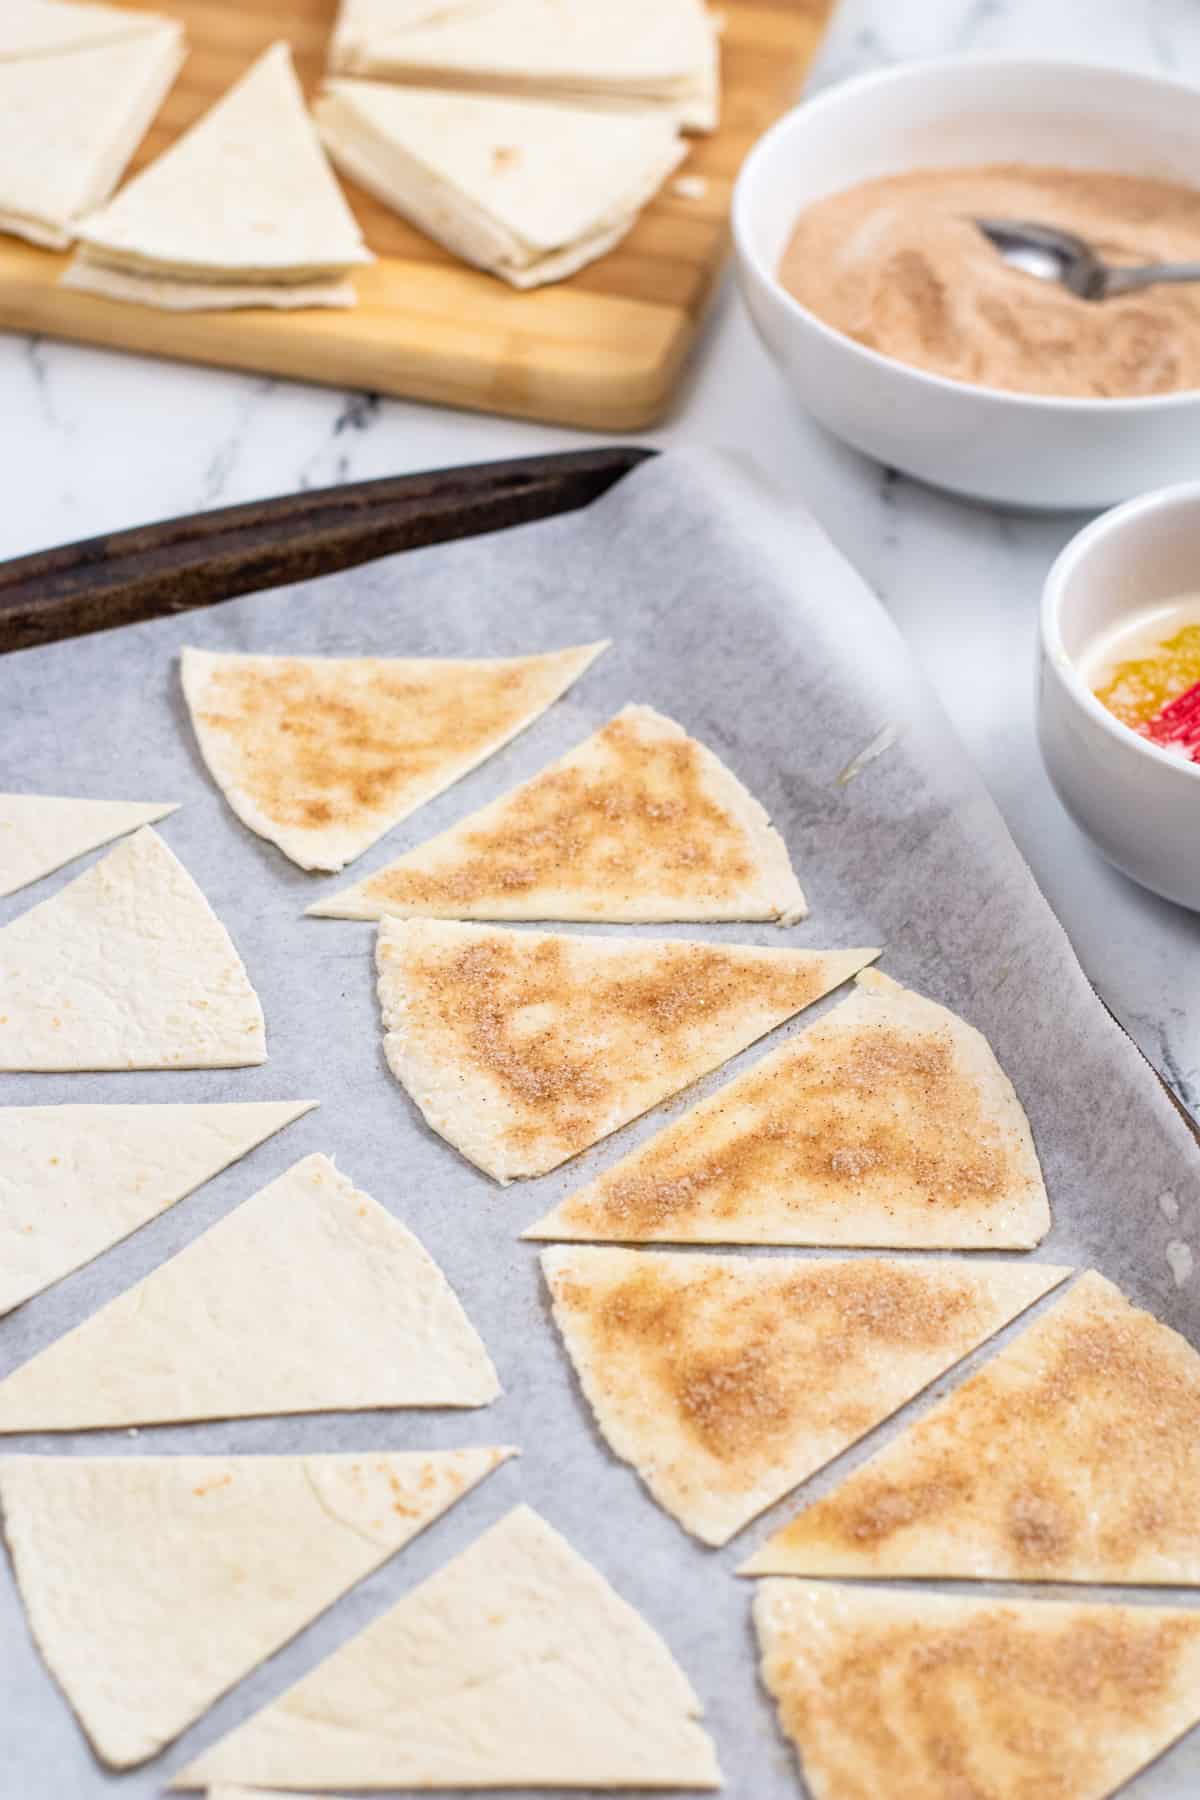 Triangular pieces of flour tortilla on parchment-lined baking sheet. Half are covered in butter, cinnamon, and sugar while the others are still plain. Bowl of cinnamon sugar and more tortilla can be seen in the background.